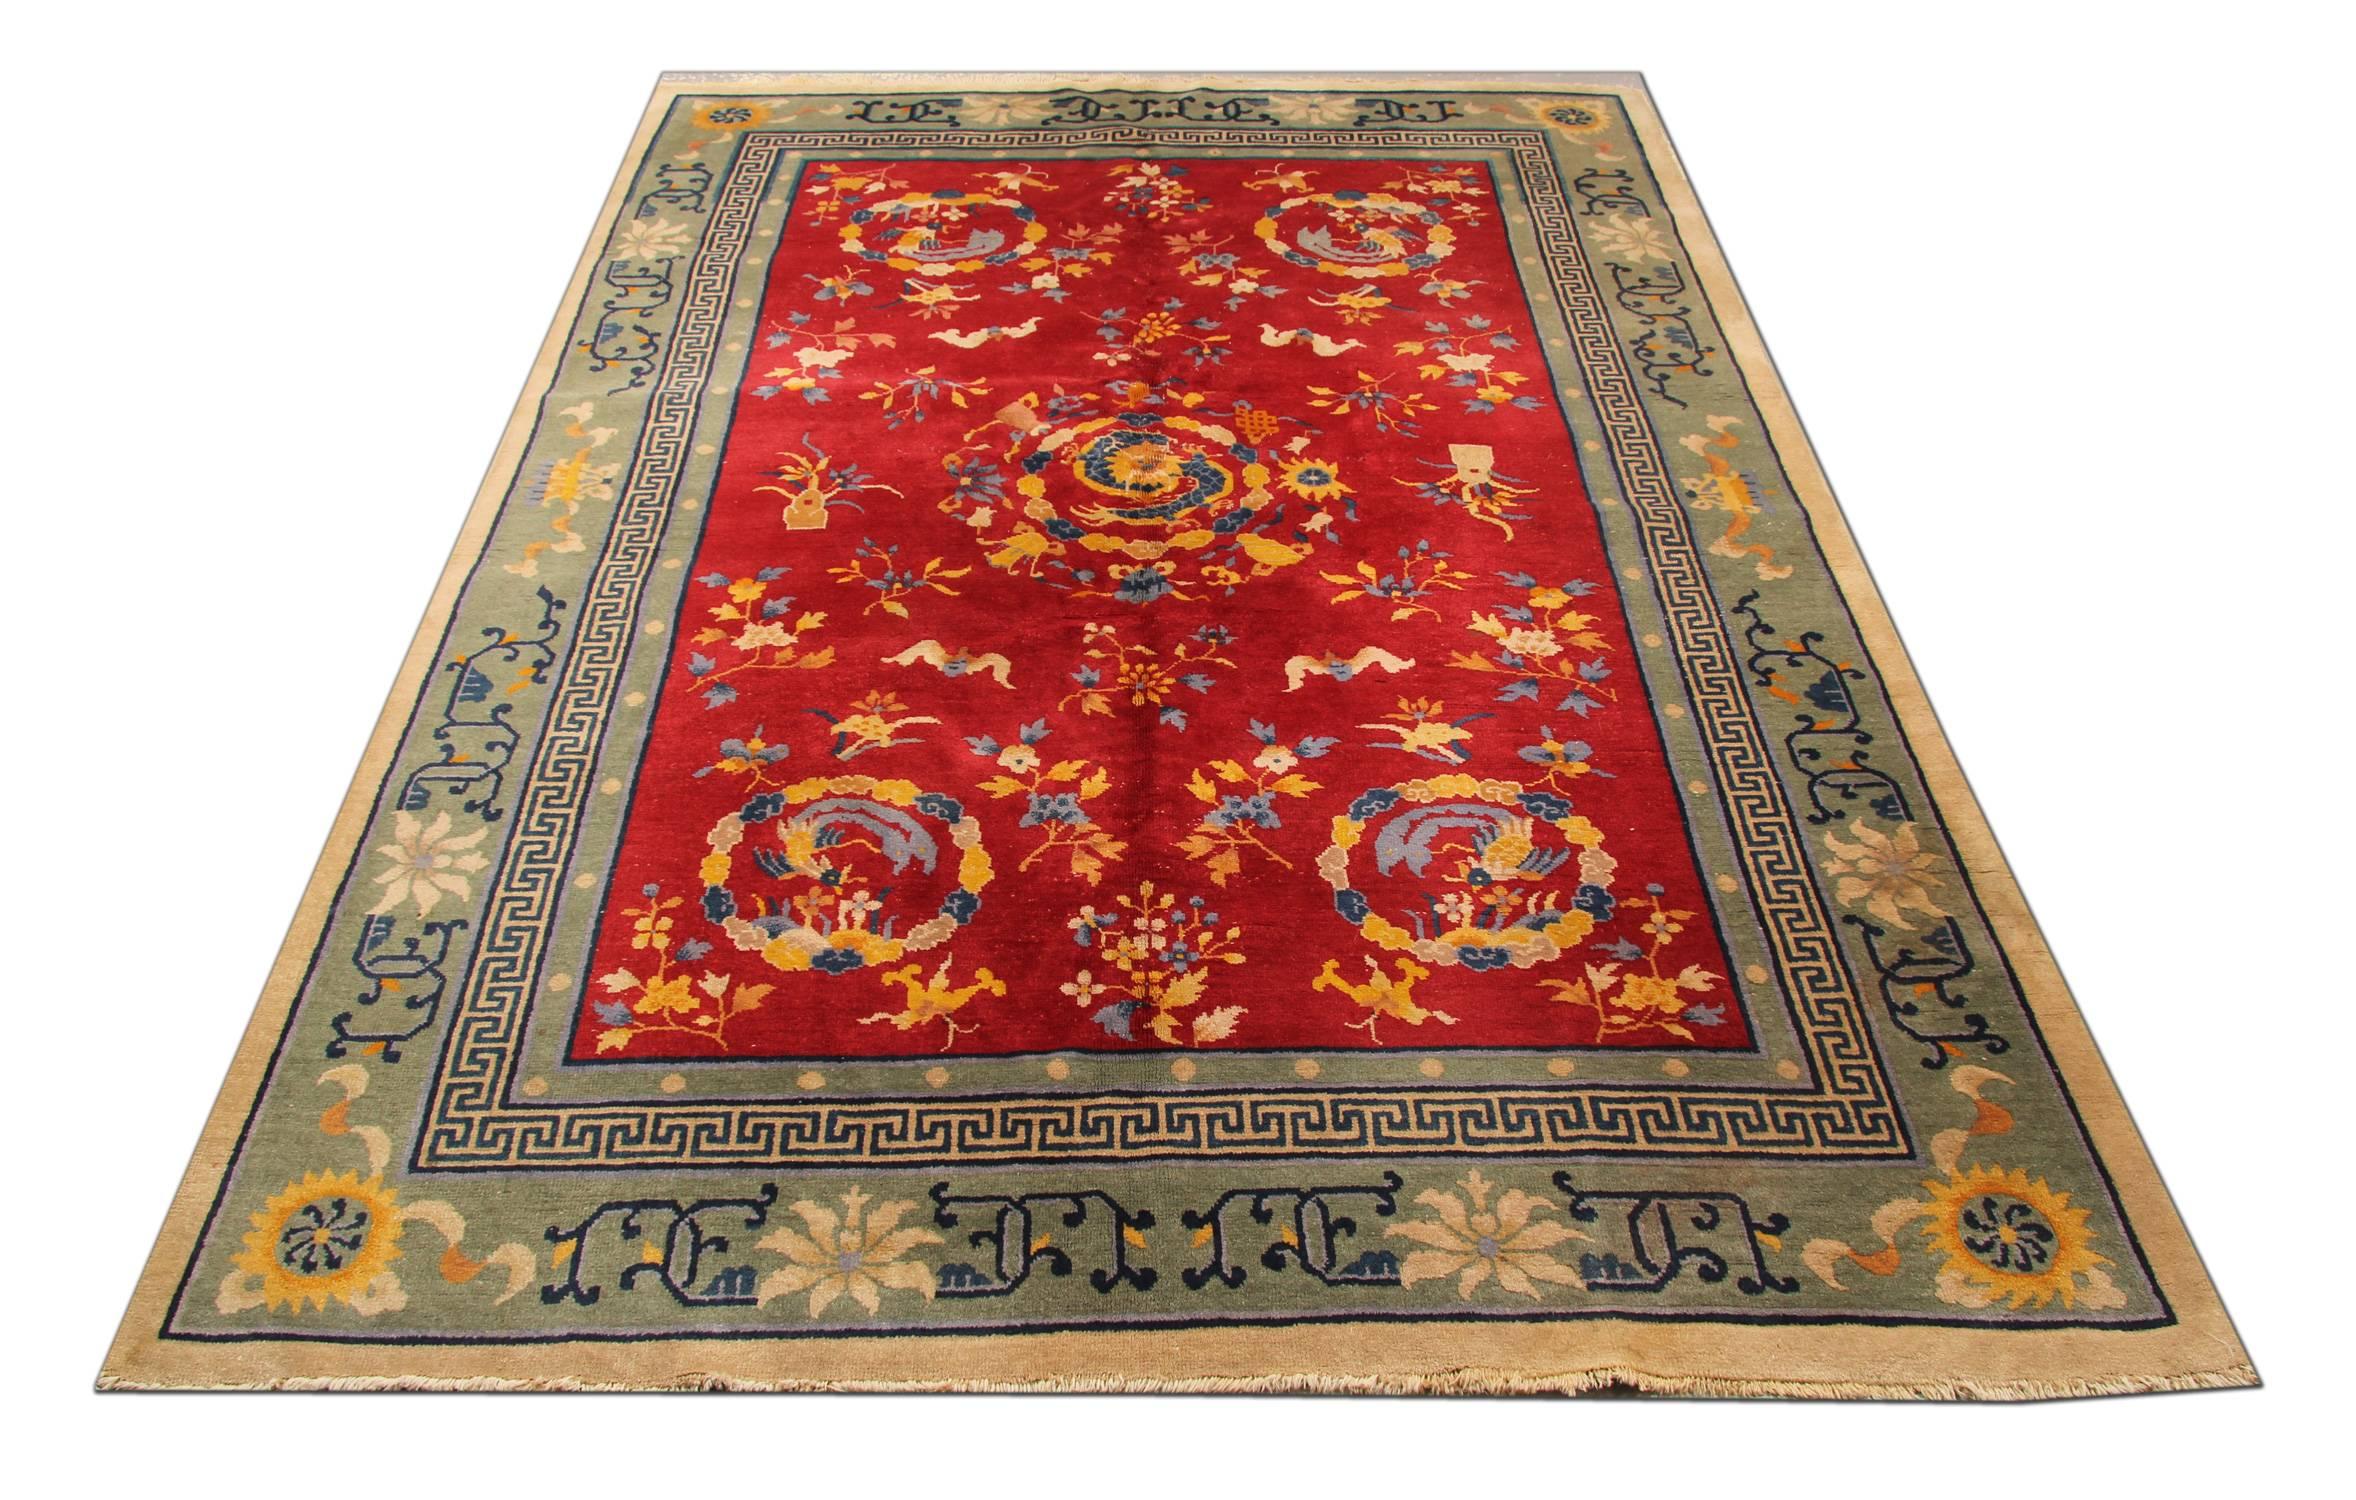 These handmade carpet wool rugs have airy and fiery elements that are grounded by splashing waves and jutting peaks that provide a sense of balance and tradition. Borrowing from the new and the old, this palatial Chinese carpet Oriental rug